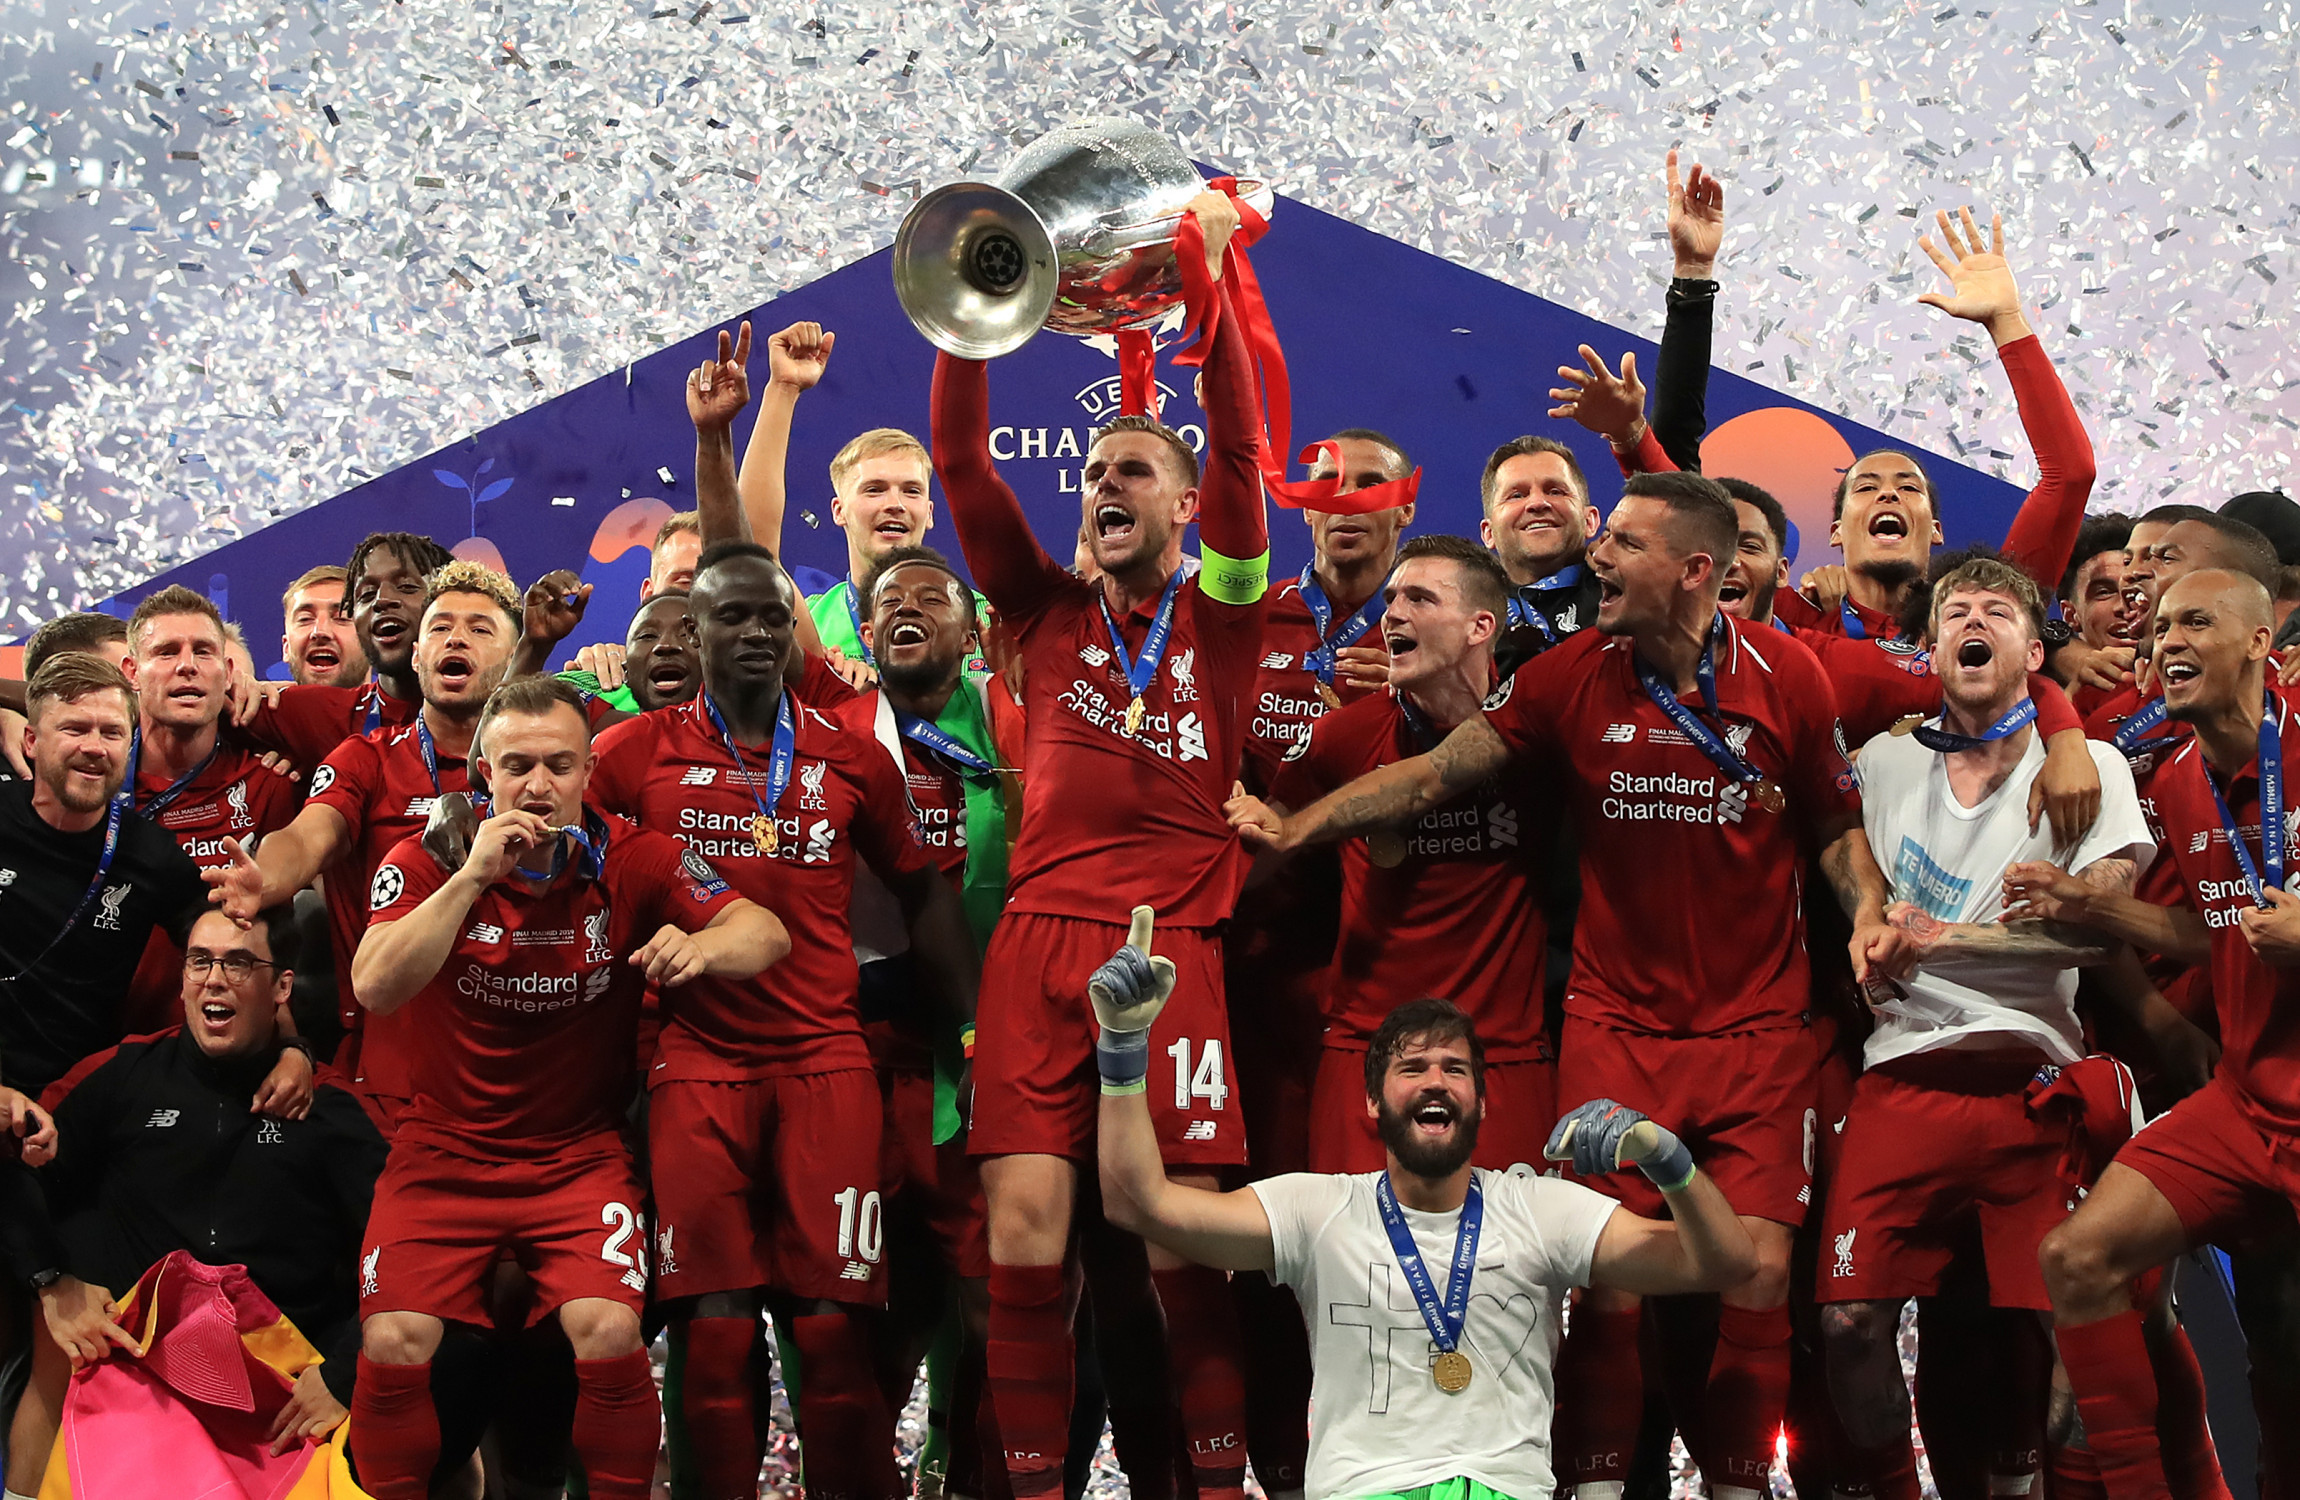 champions league final tickets liverpool